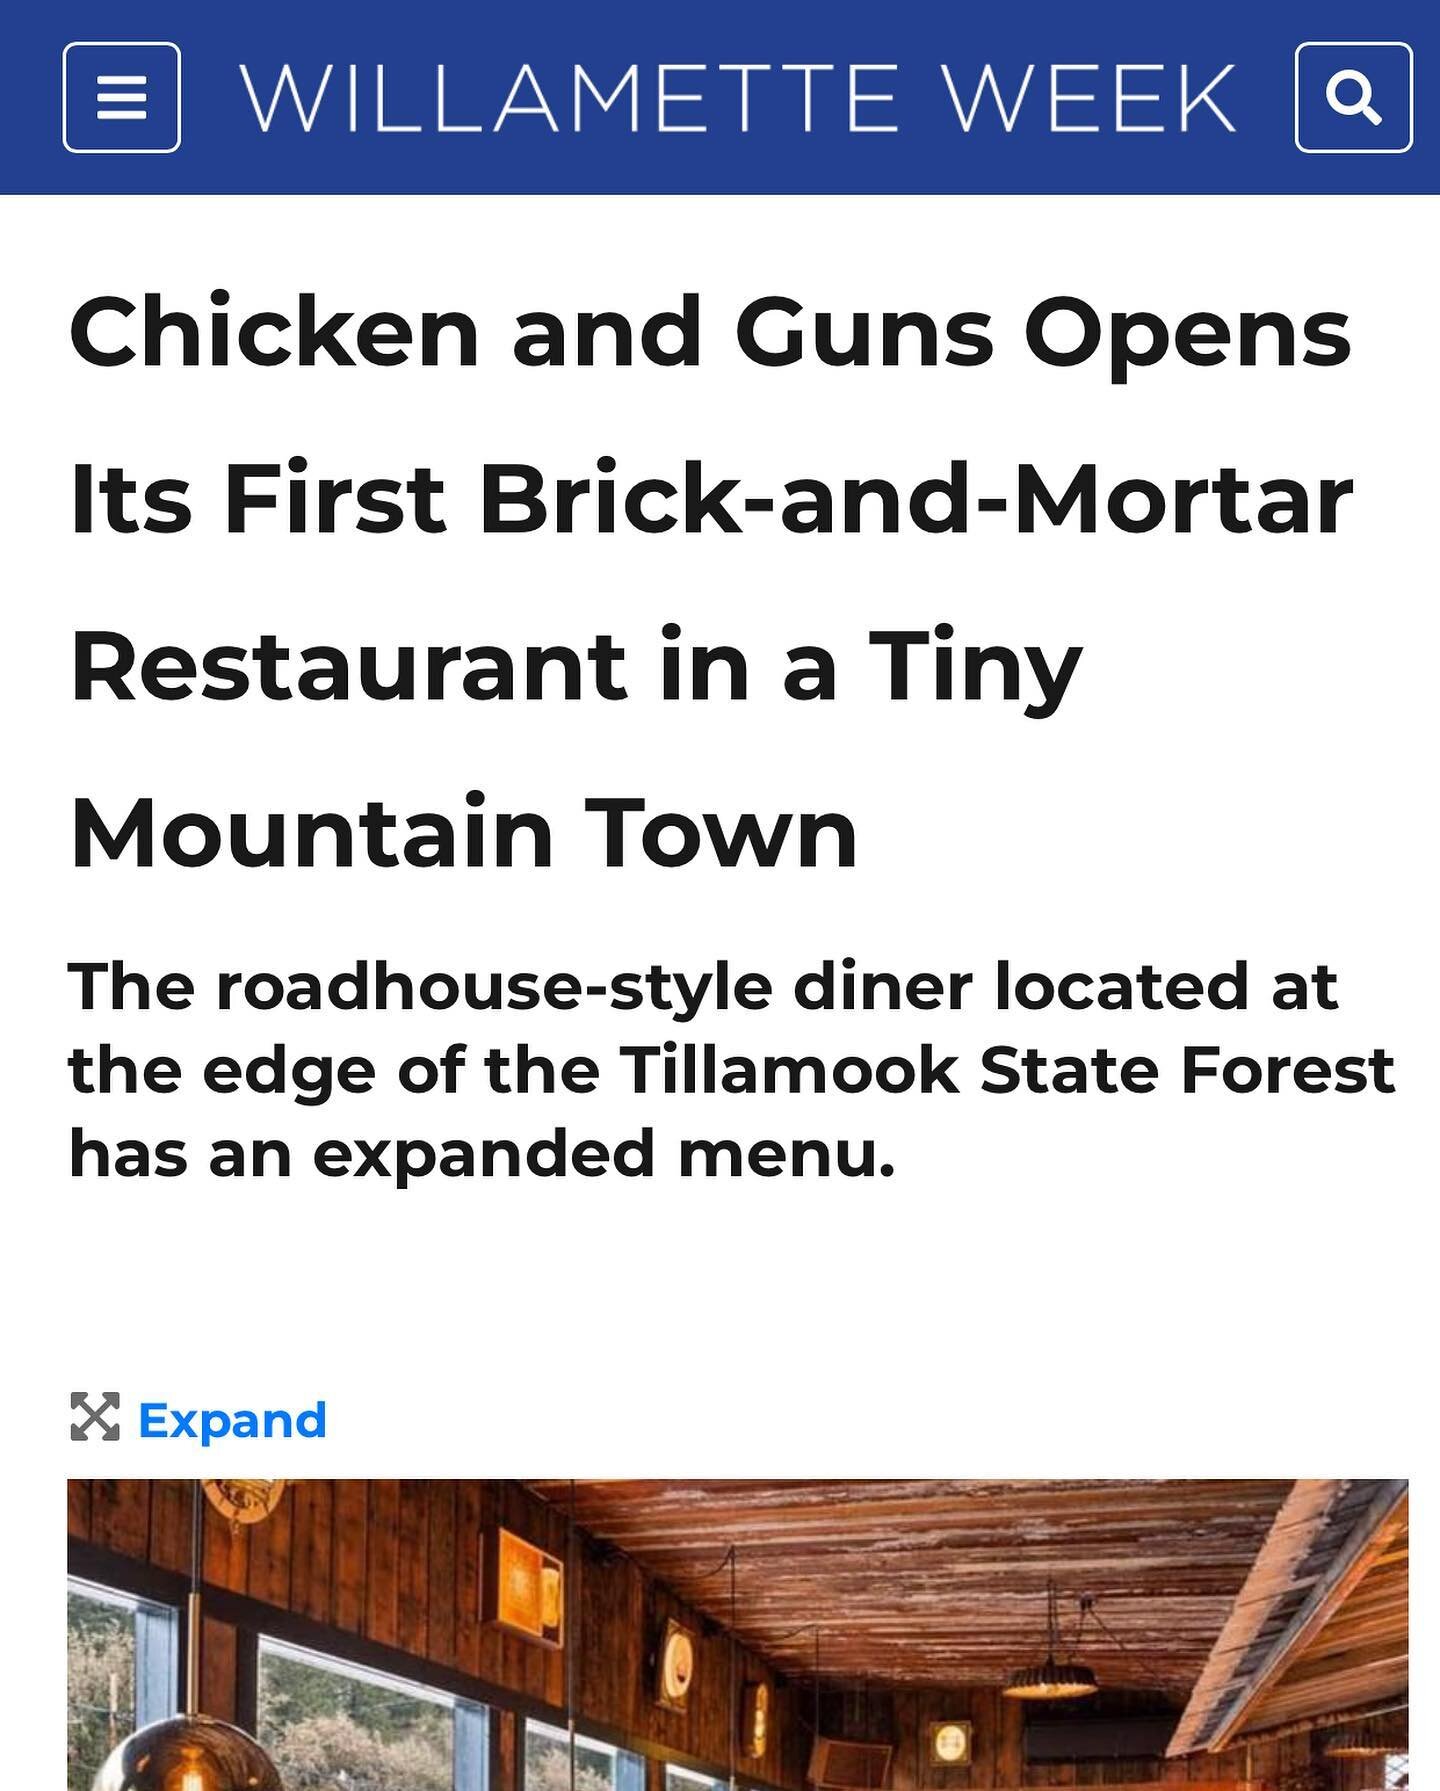 Surprise! We out there! 

https://www.wweek.com/food/2023/07/31/chicken-and-guns-has-opened-its-first-brick-and-mortar-restaurant-in-gales-creek/

Thank you willamette week for the mention!!!!